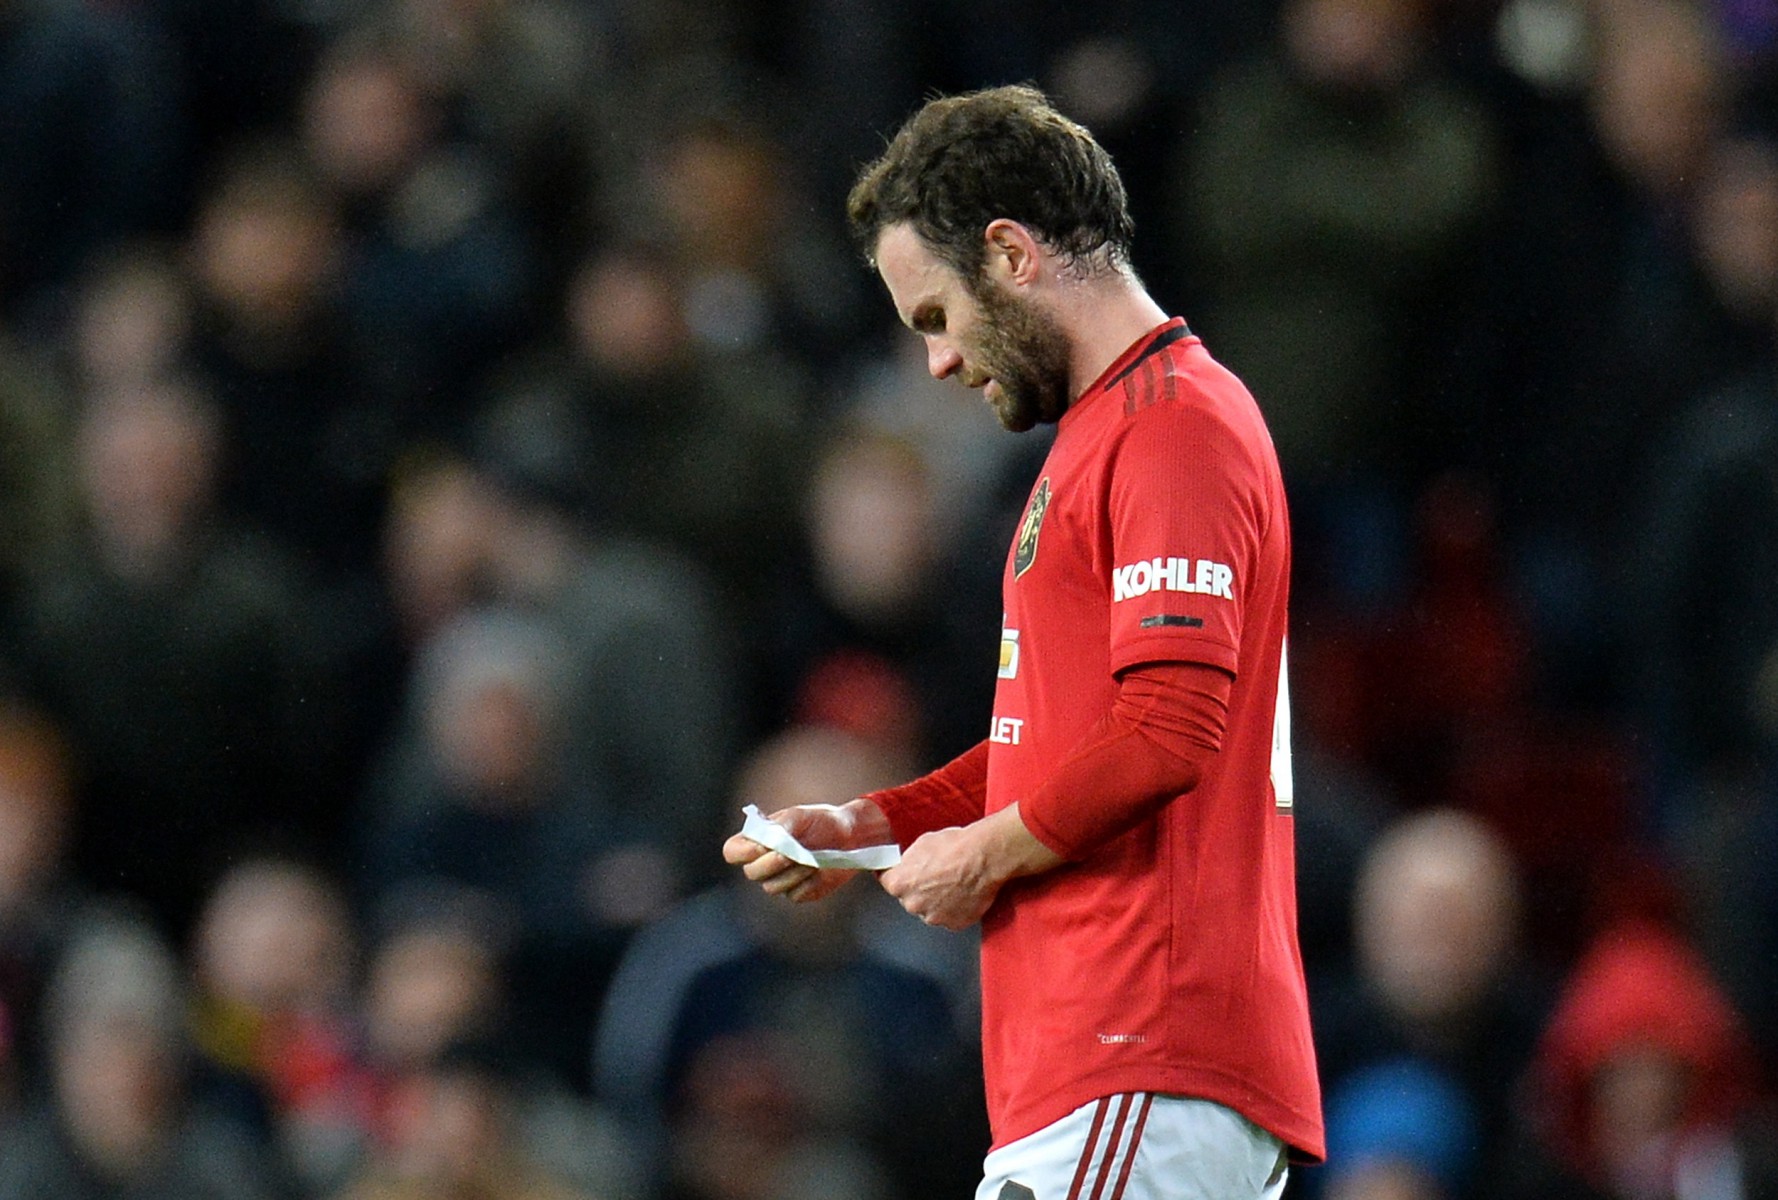 , Man Utd boss Solskjaer reveals tactics note contained genius instructions for Mata to swap wings with James before goal